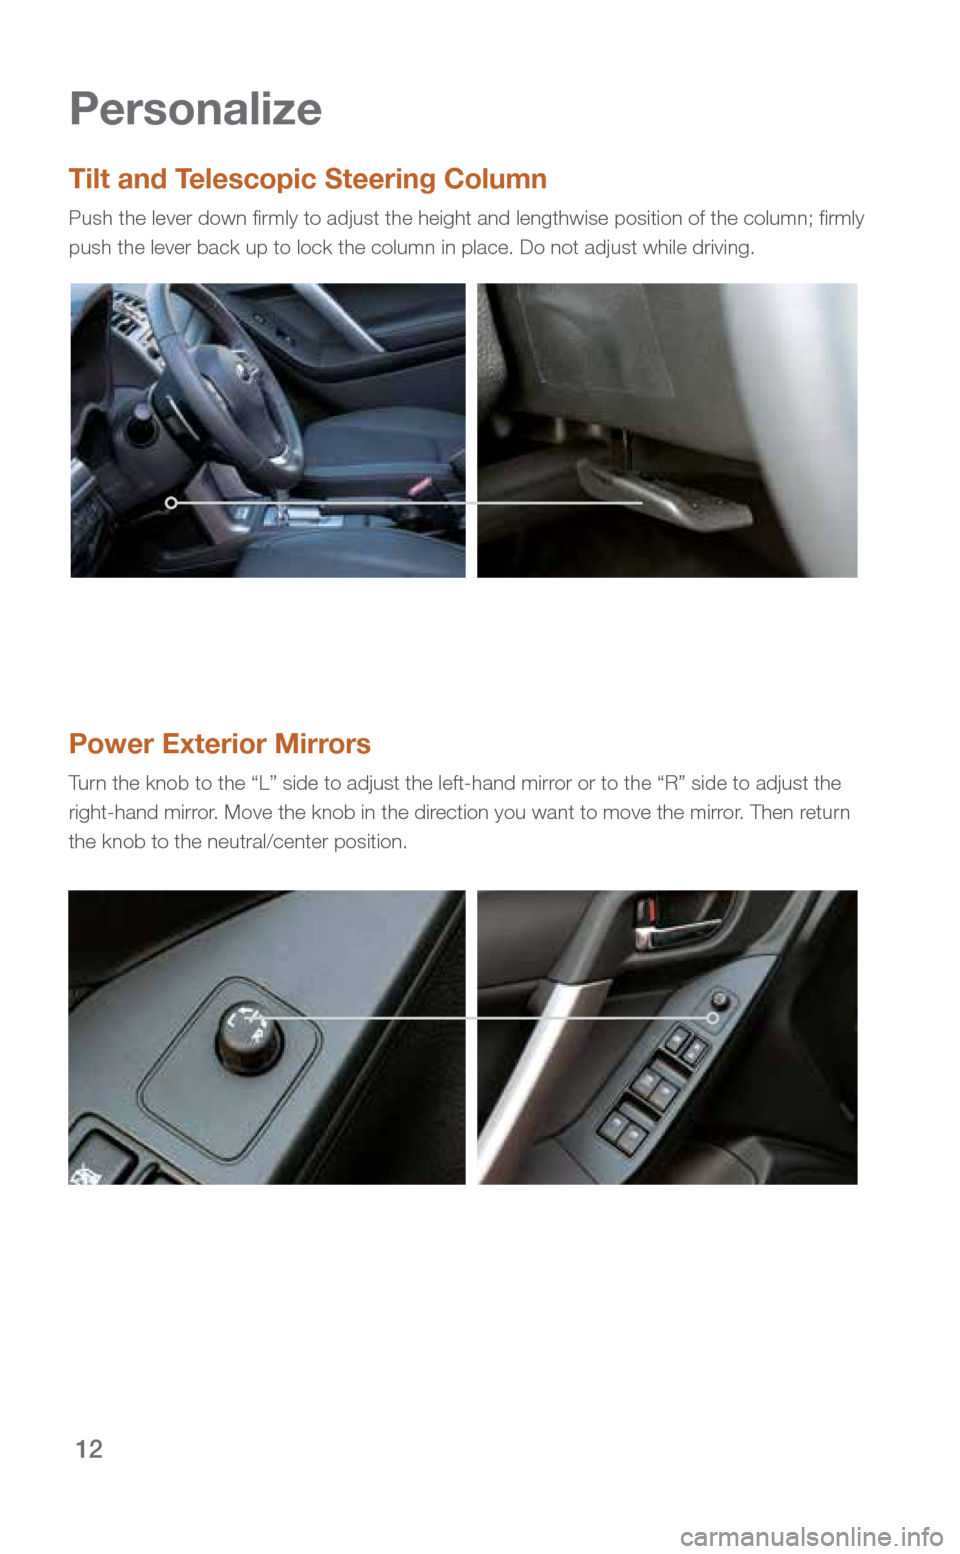 SUBARU FORESTER 2016 SJ / 4.G Quick Reference Guide 12
Power Exterior Mirrors
Turn the knob to the “L” side to adjust the left-hand mirror or to the “R” side to adjust the 
right-hand mirror. Move the knob in the direction you want to move the 